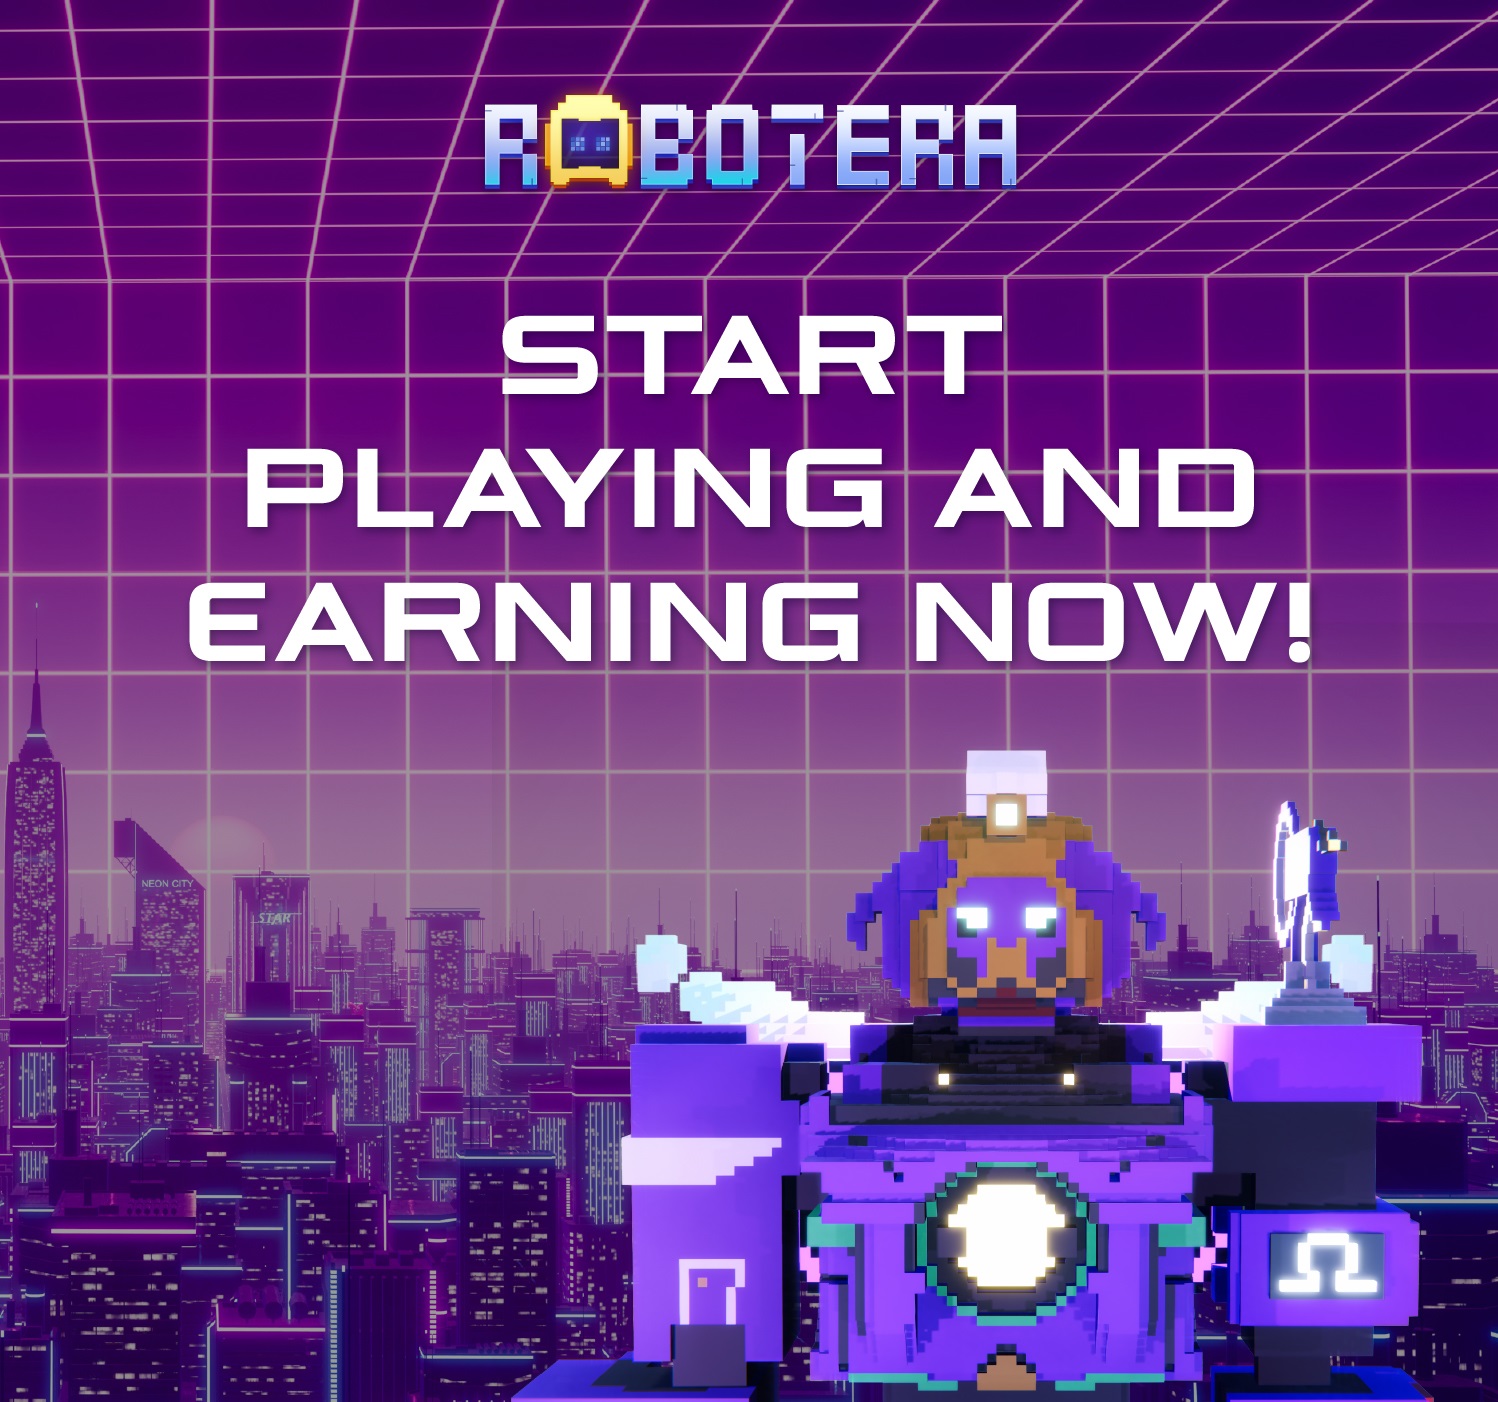 RobotEra’s Cutting Edge Metaverse Project – How do you buy early?